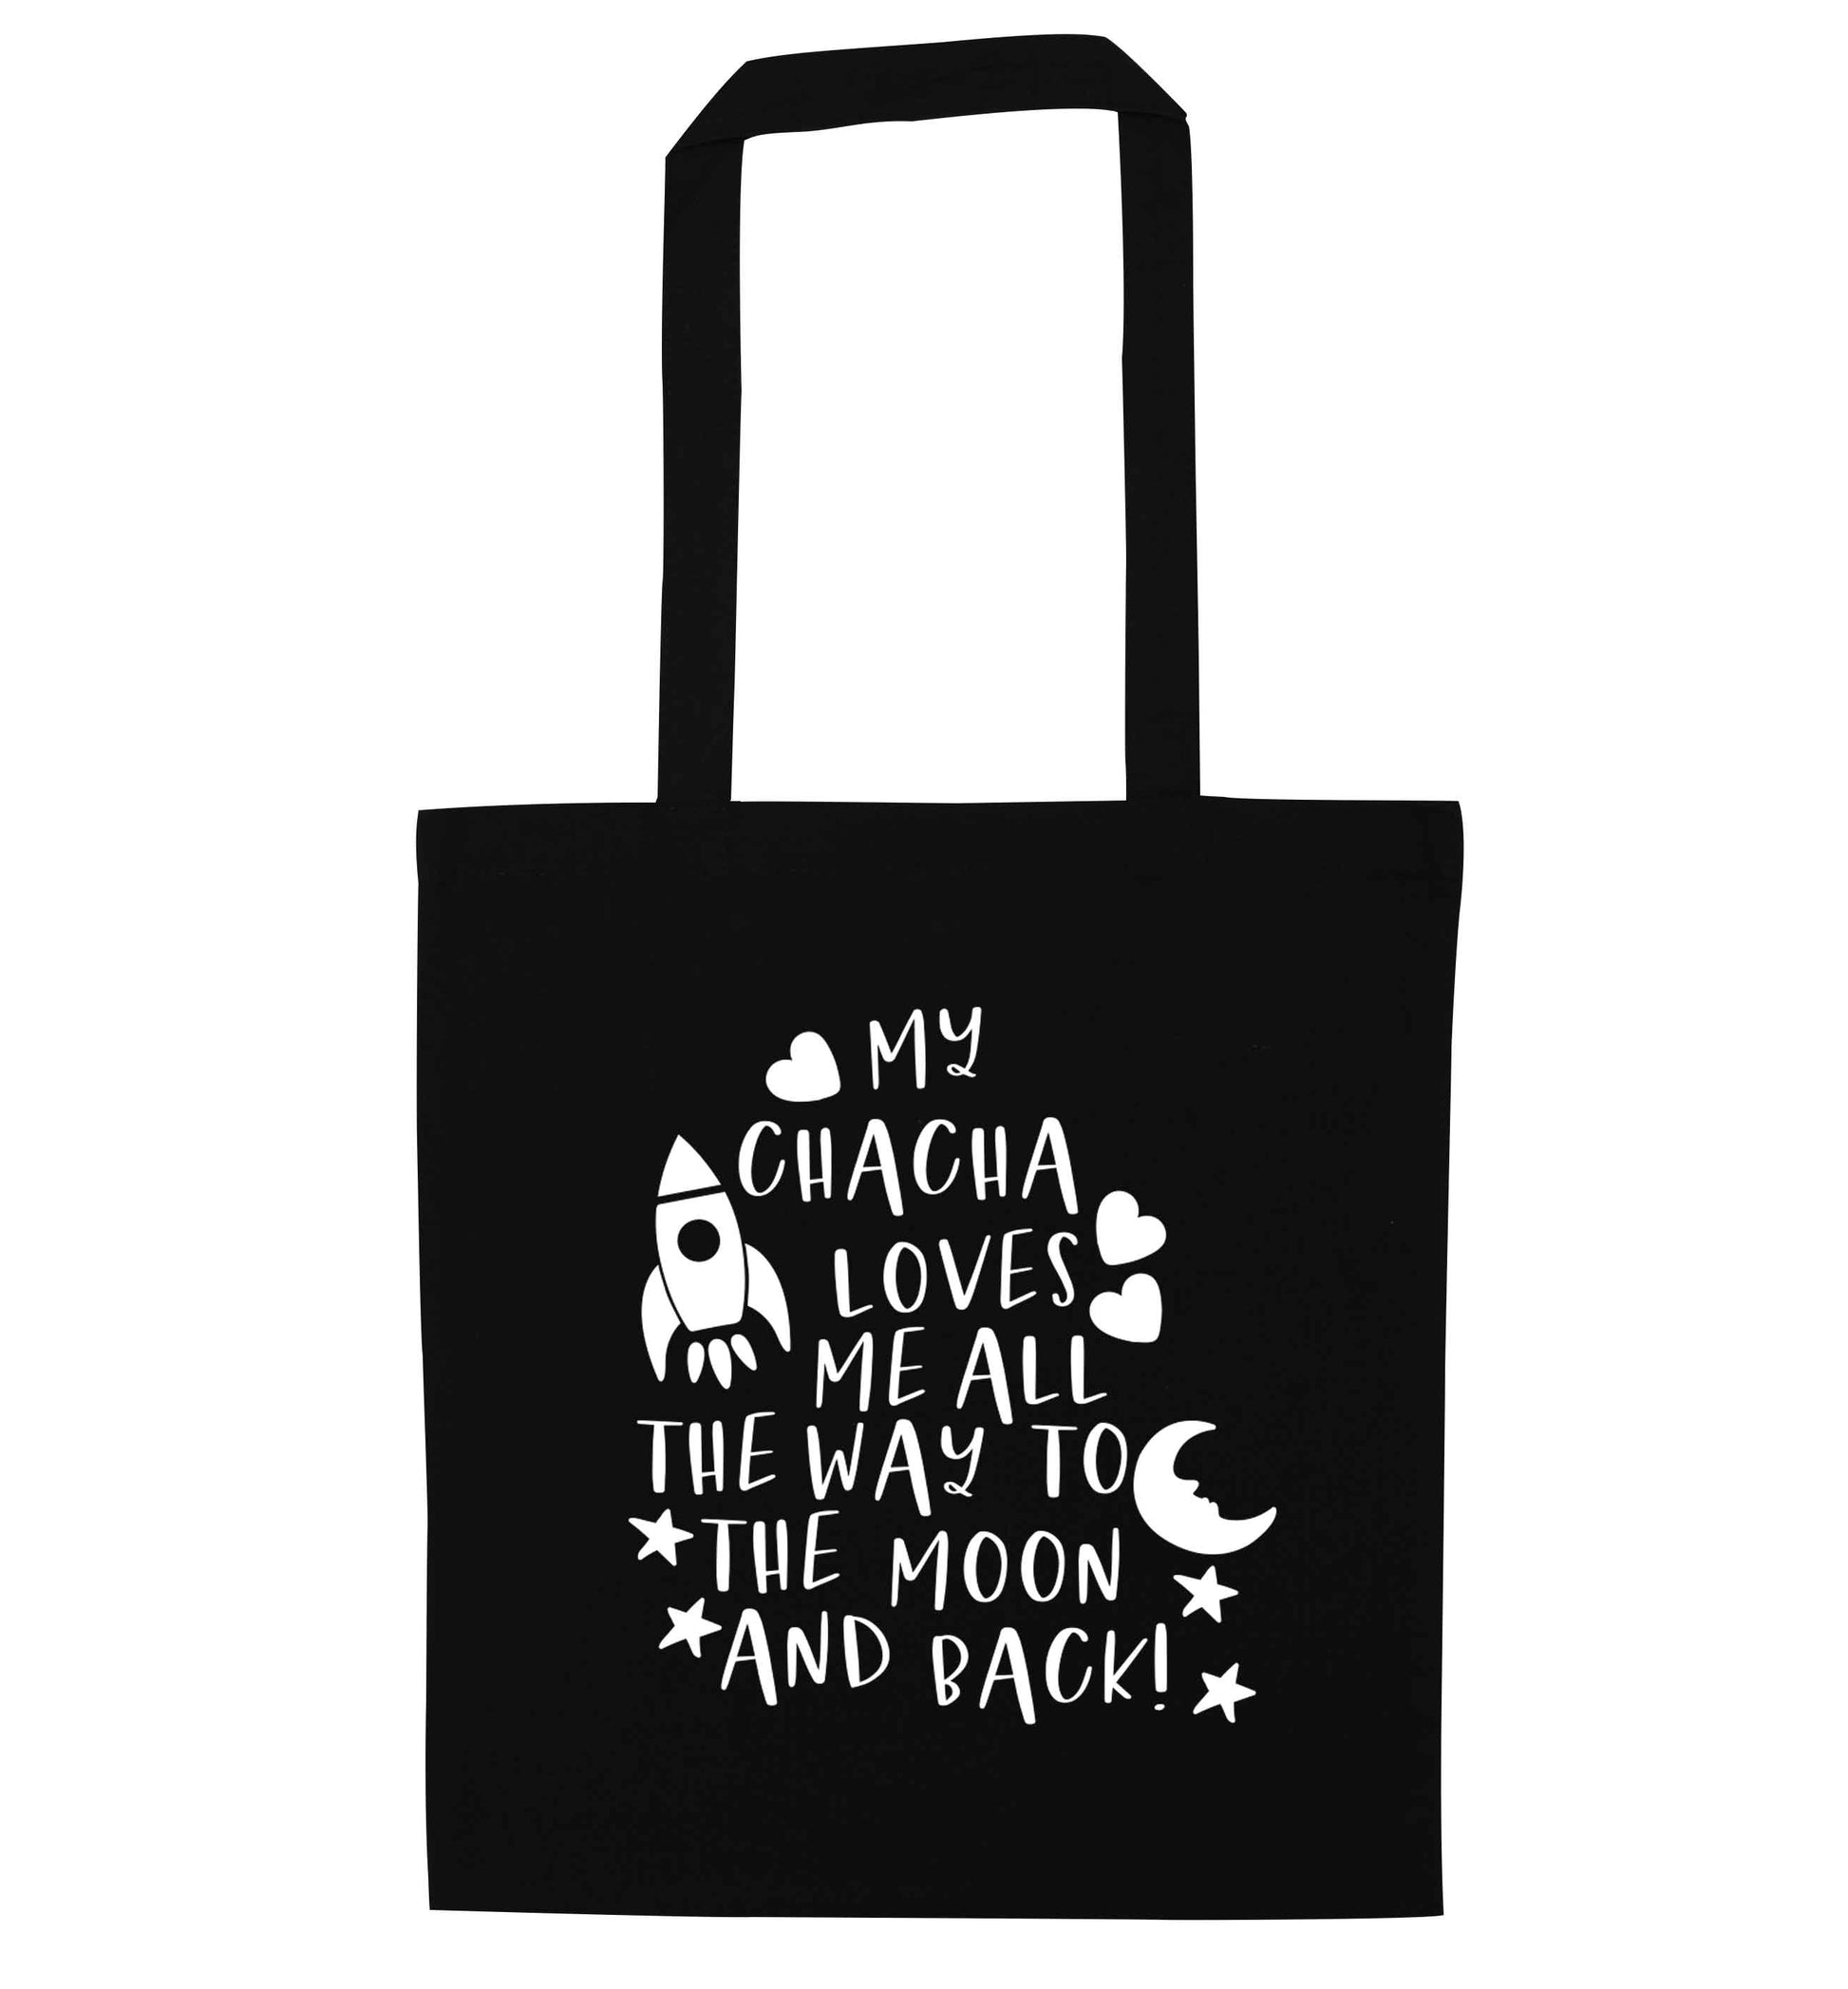 My chacha loves me all the way to the moon and back black tote bag